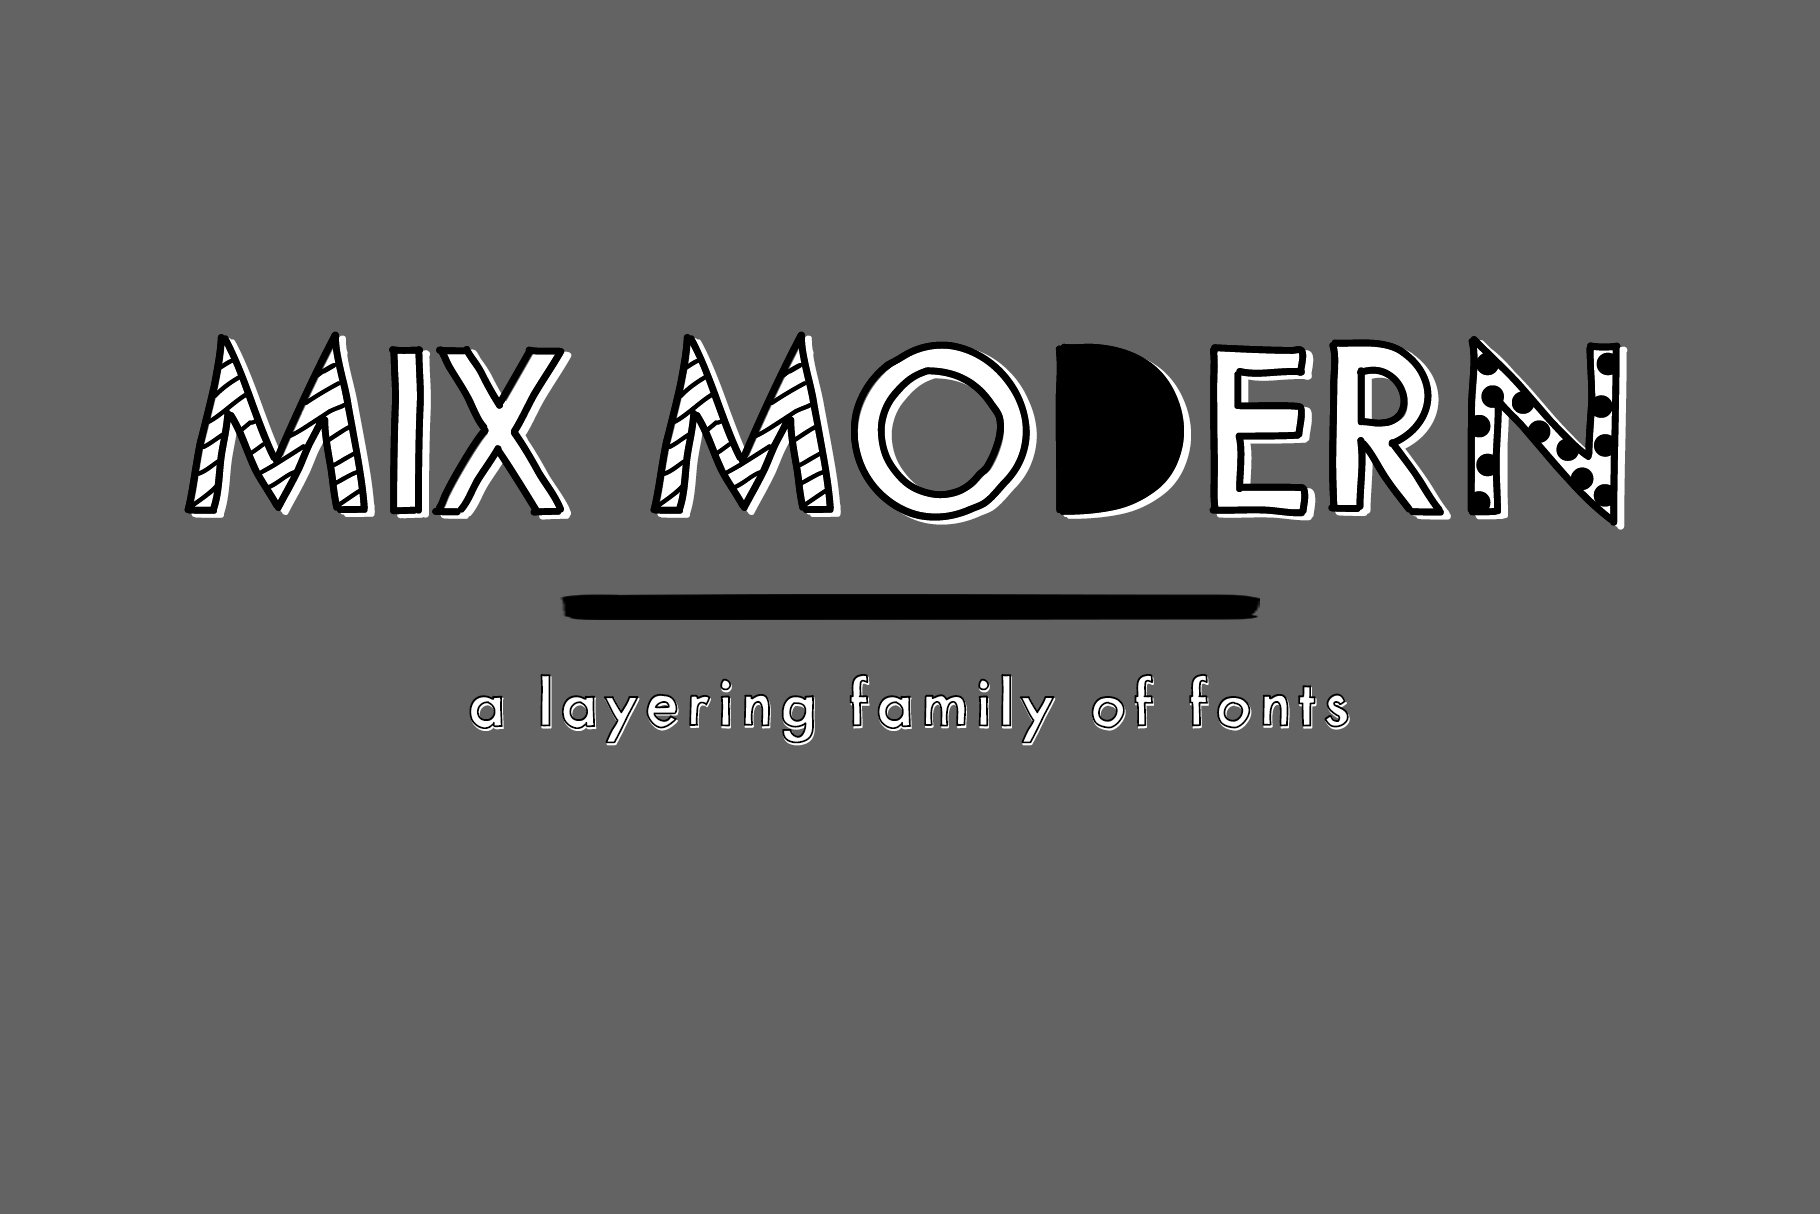 Mix Modern — A Layering Fonts Family cover image.